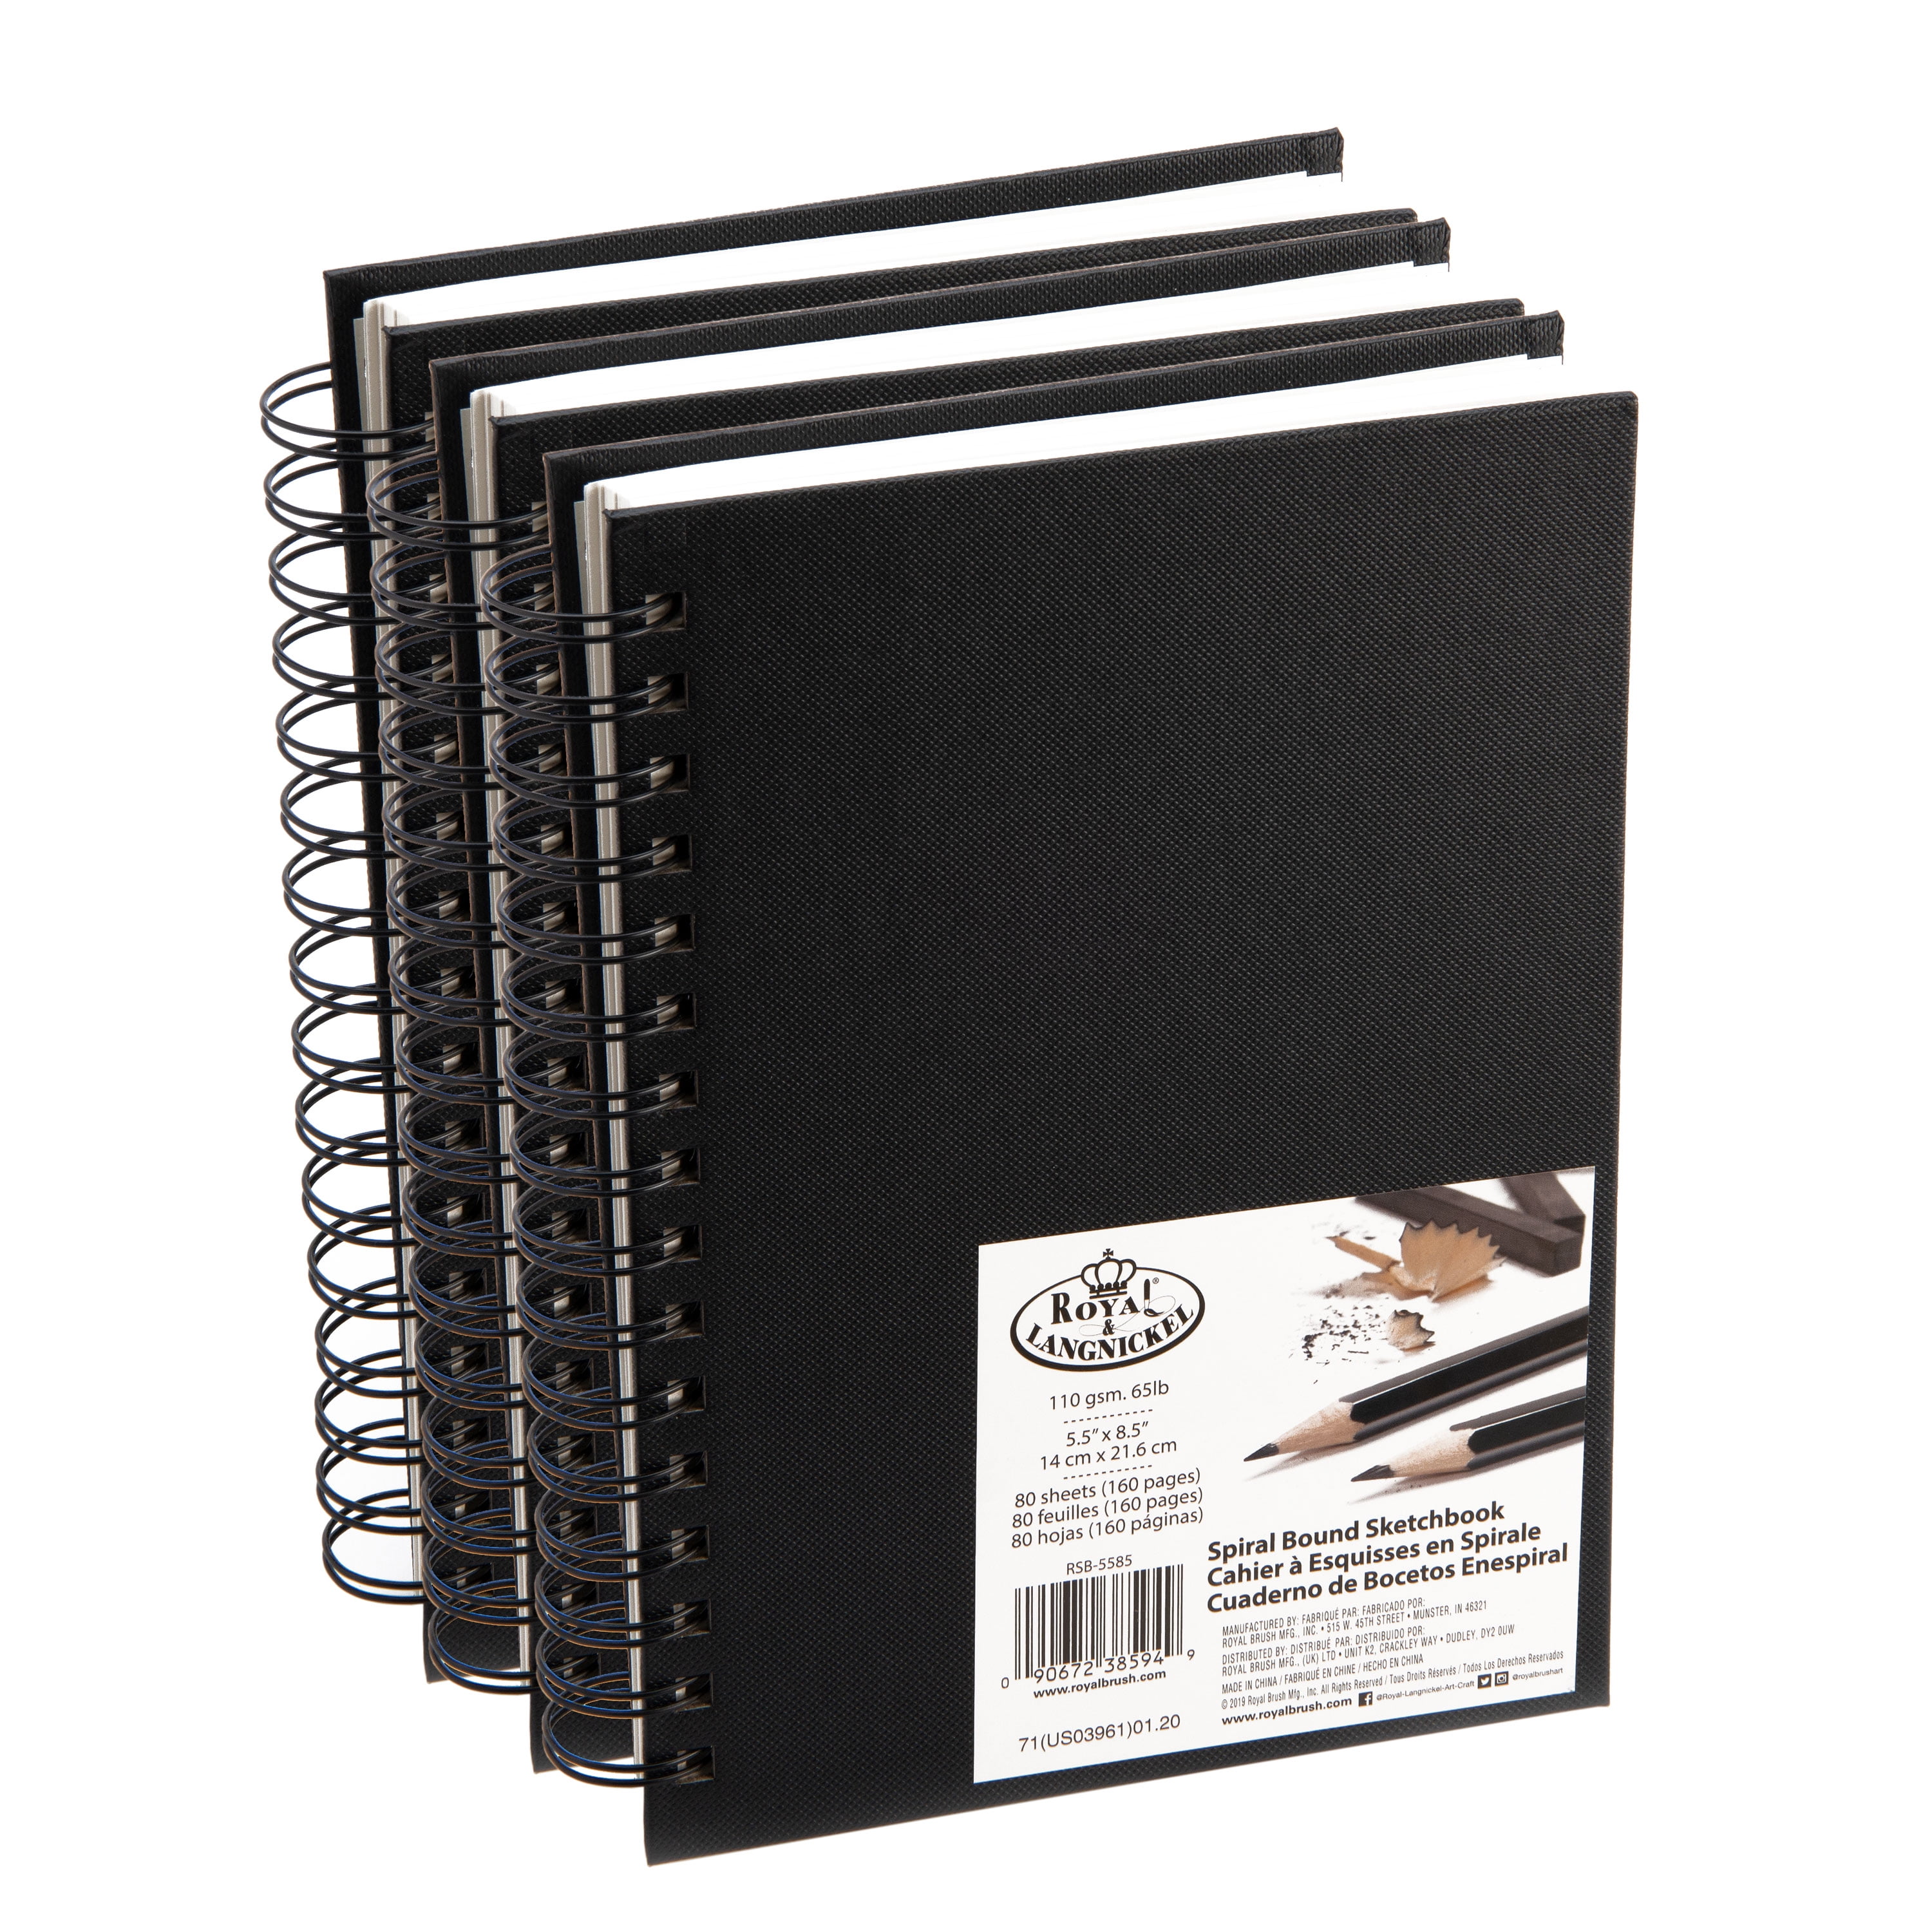 Royal & Langnickel Essentials - 3 Pack 5.5 x 8.5 Spiralbound Drawing  Sketch Book - 80 Sheets, 65 lb. Paper